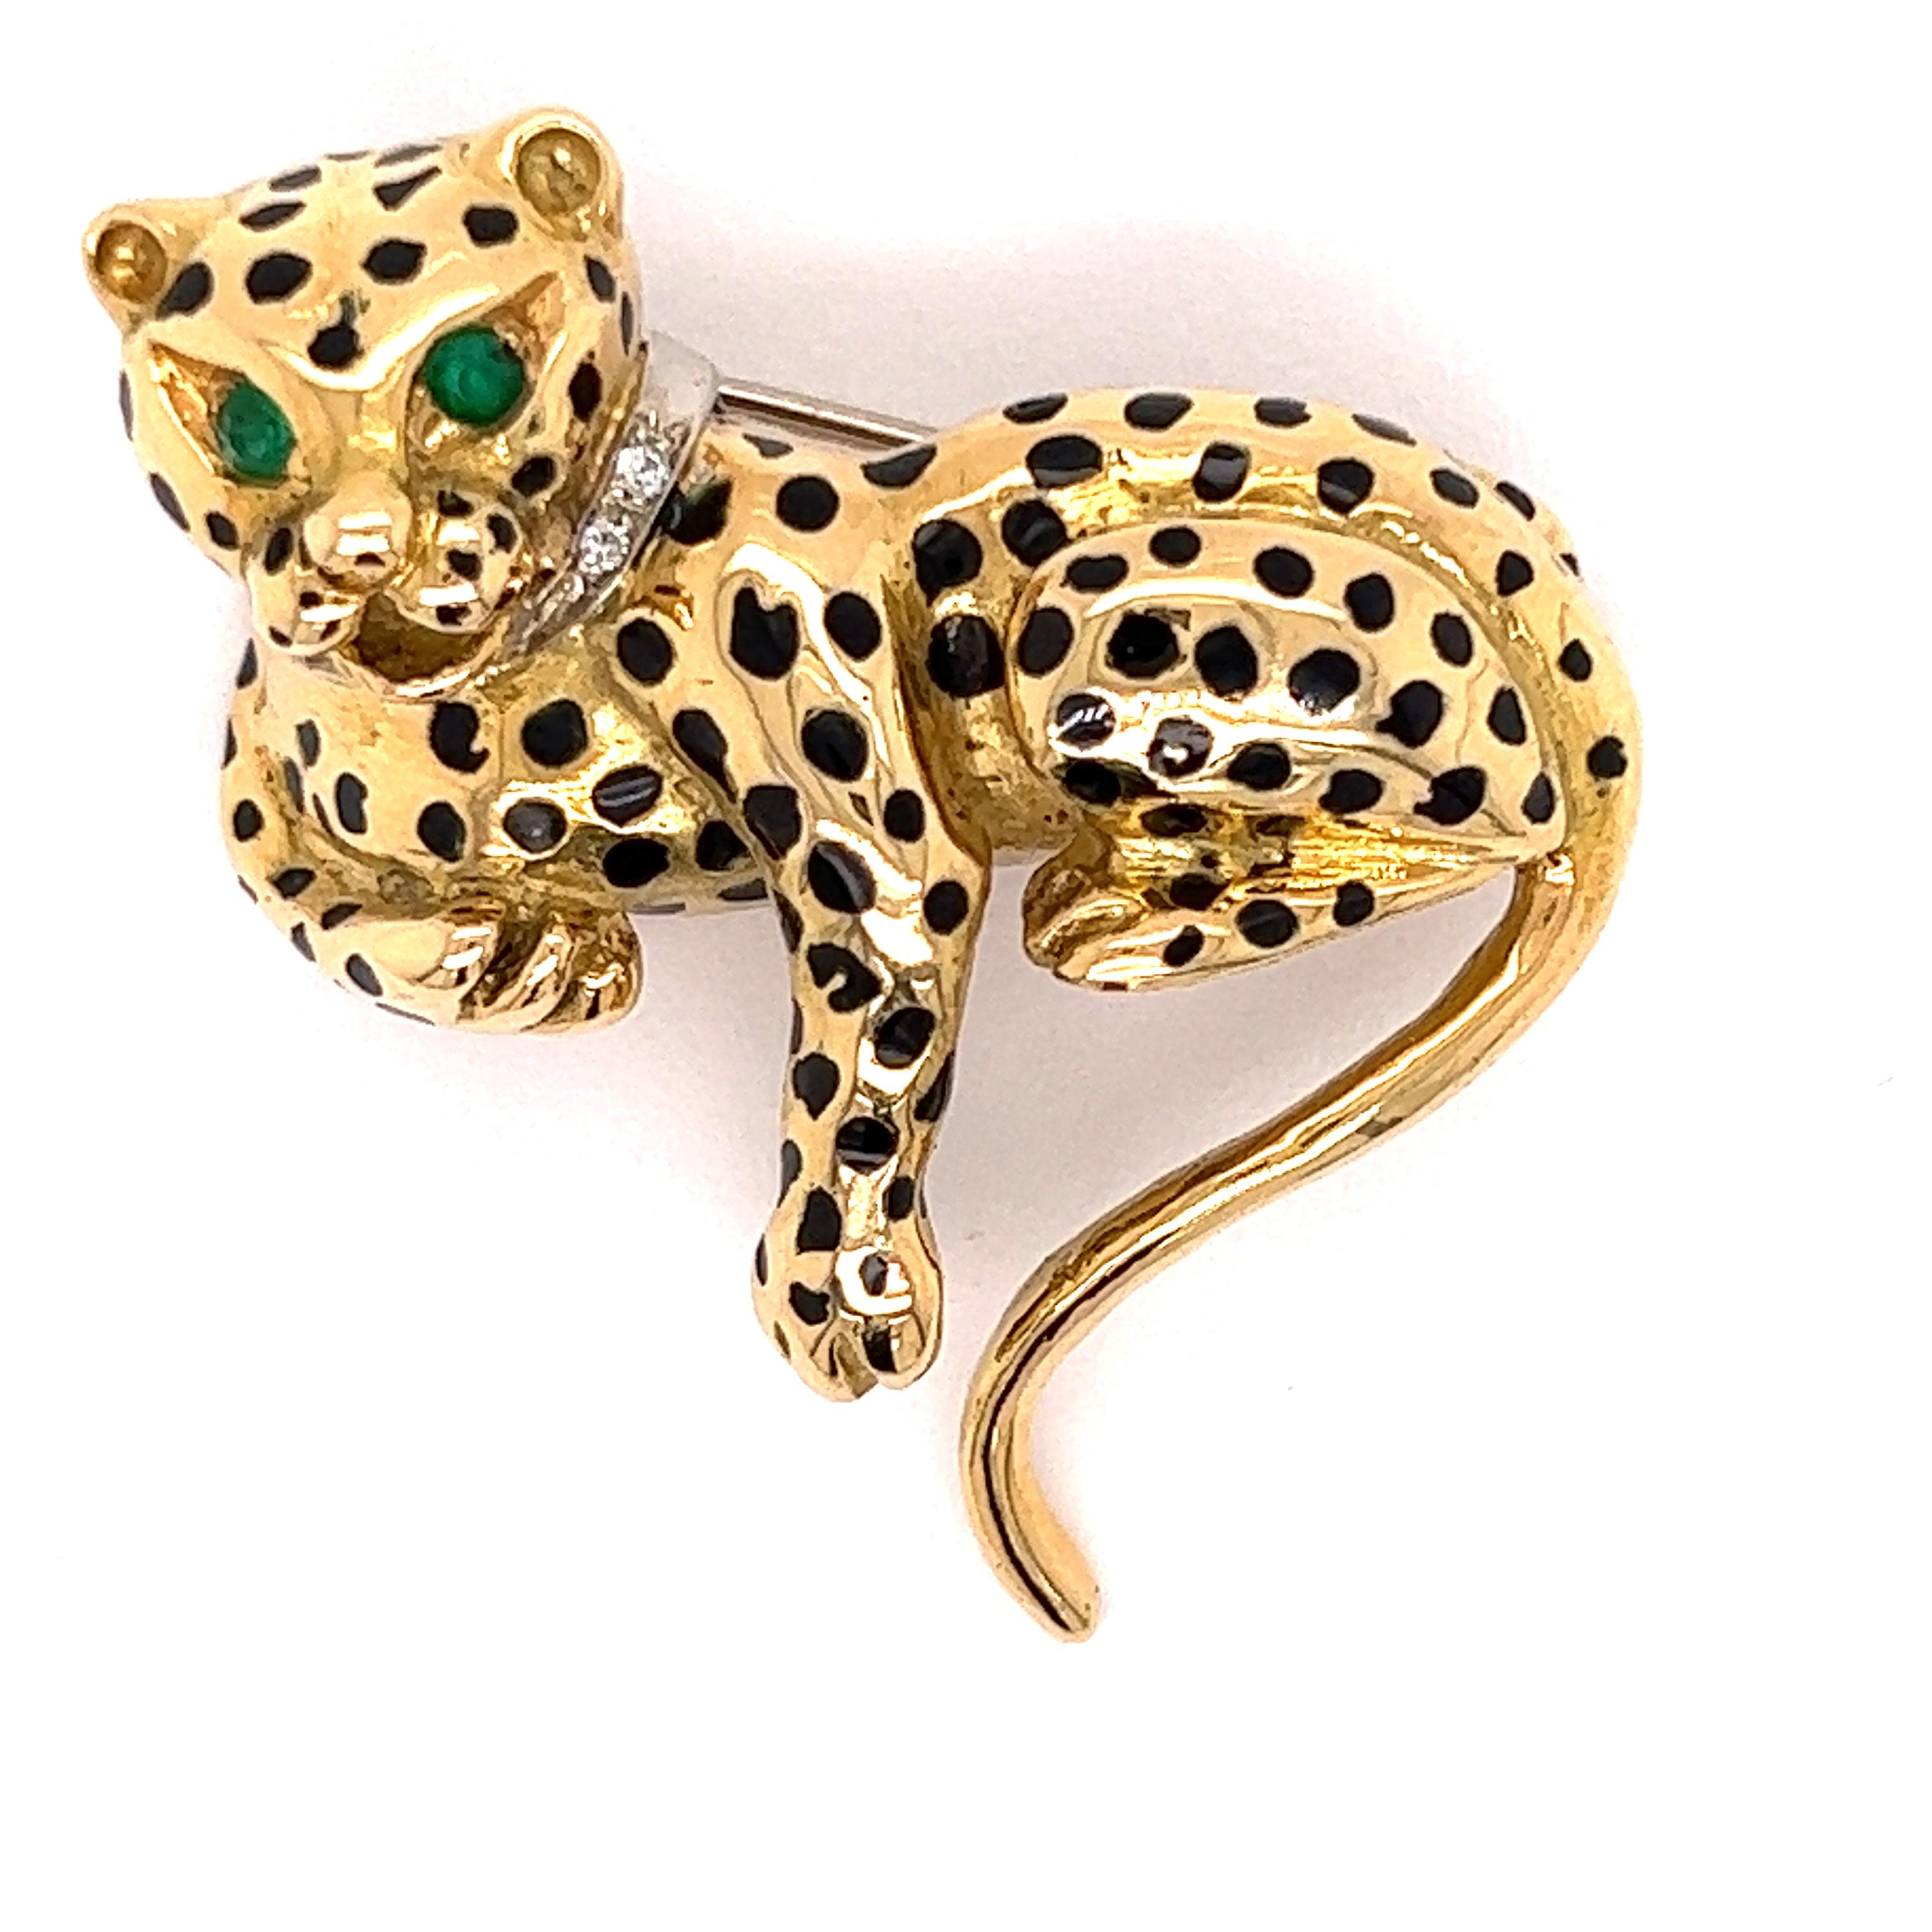 Call it a Panther, Cougar or Leopard, either way it is the absolute purrrfect gift for your cat loving companion.  This substantial estate pin/brooch weighs approximately 22.63 grams of 18Kt yellow gold.  There is .05 cttw in emeralds for the eyes